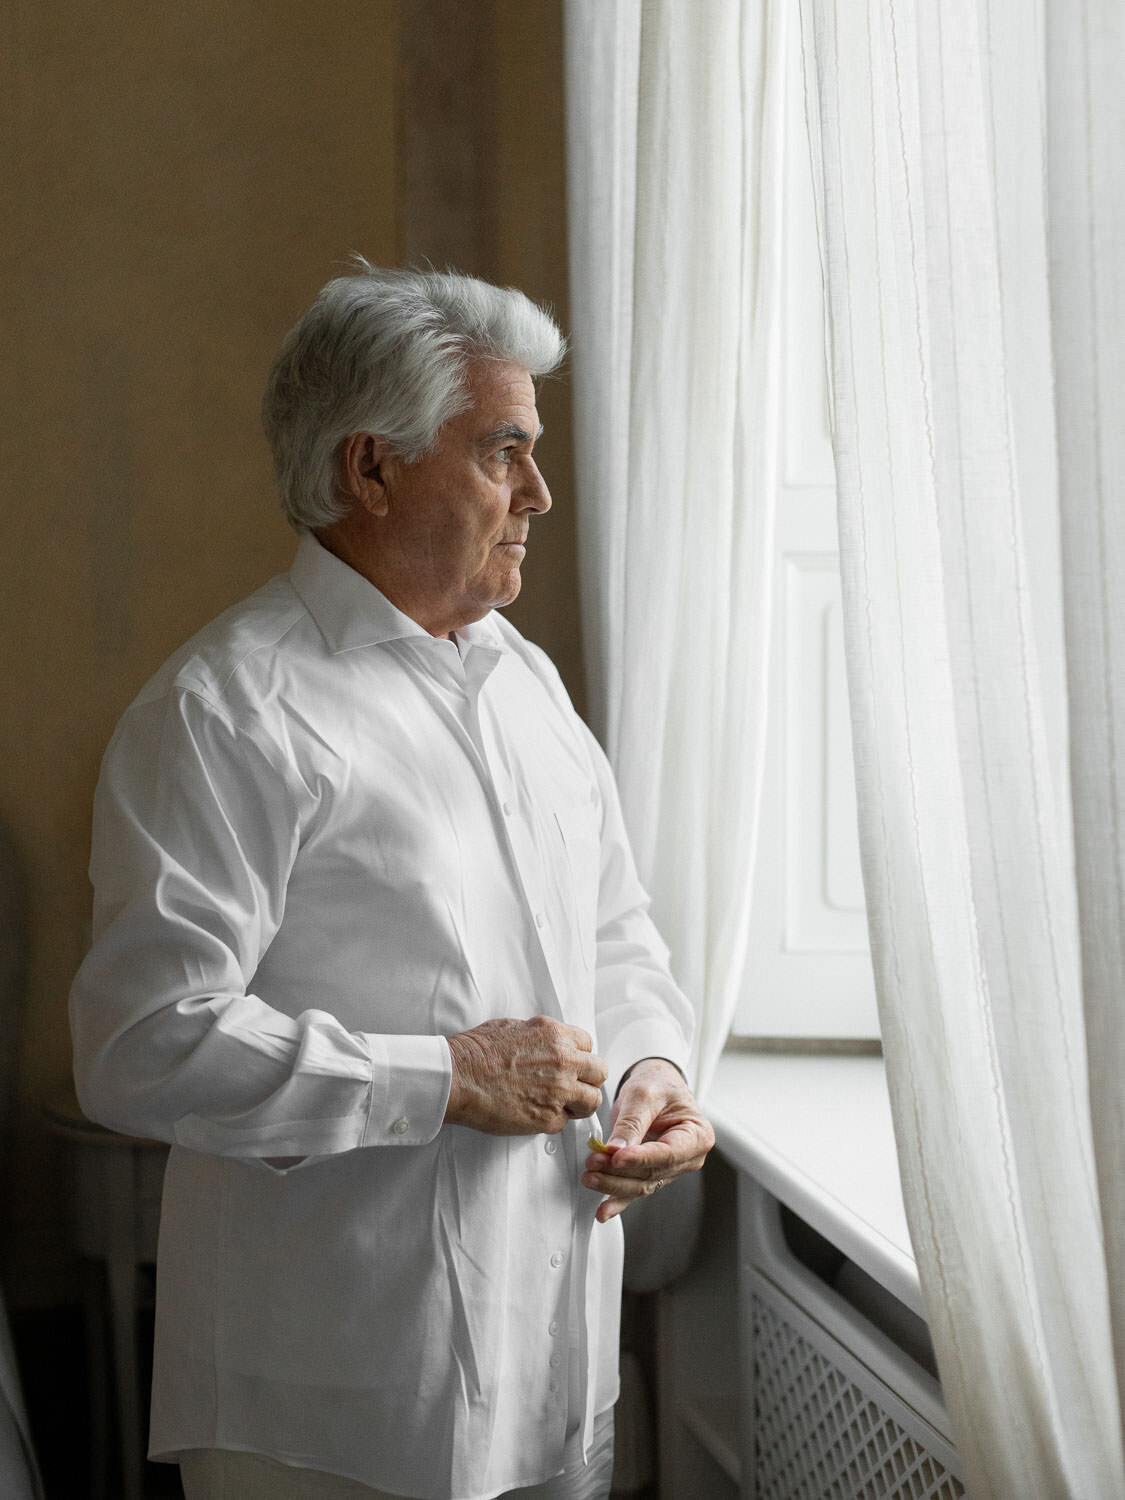 grey headed father buttoning white shirt in front of window